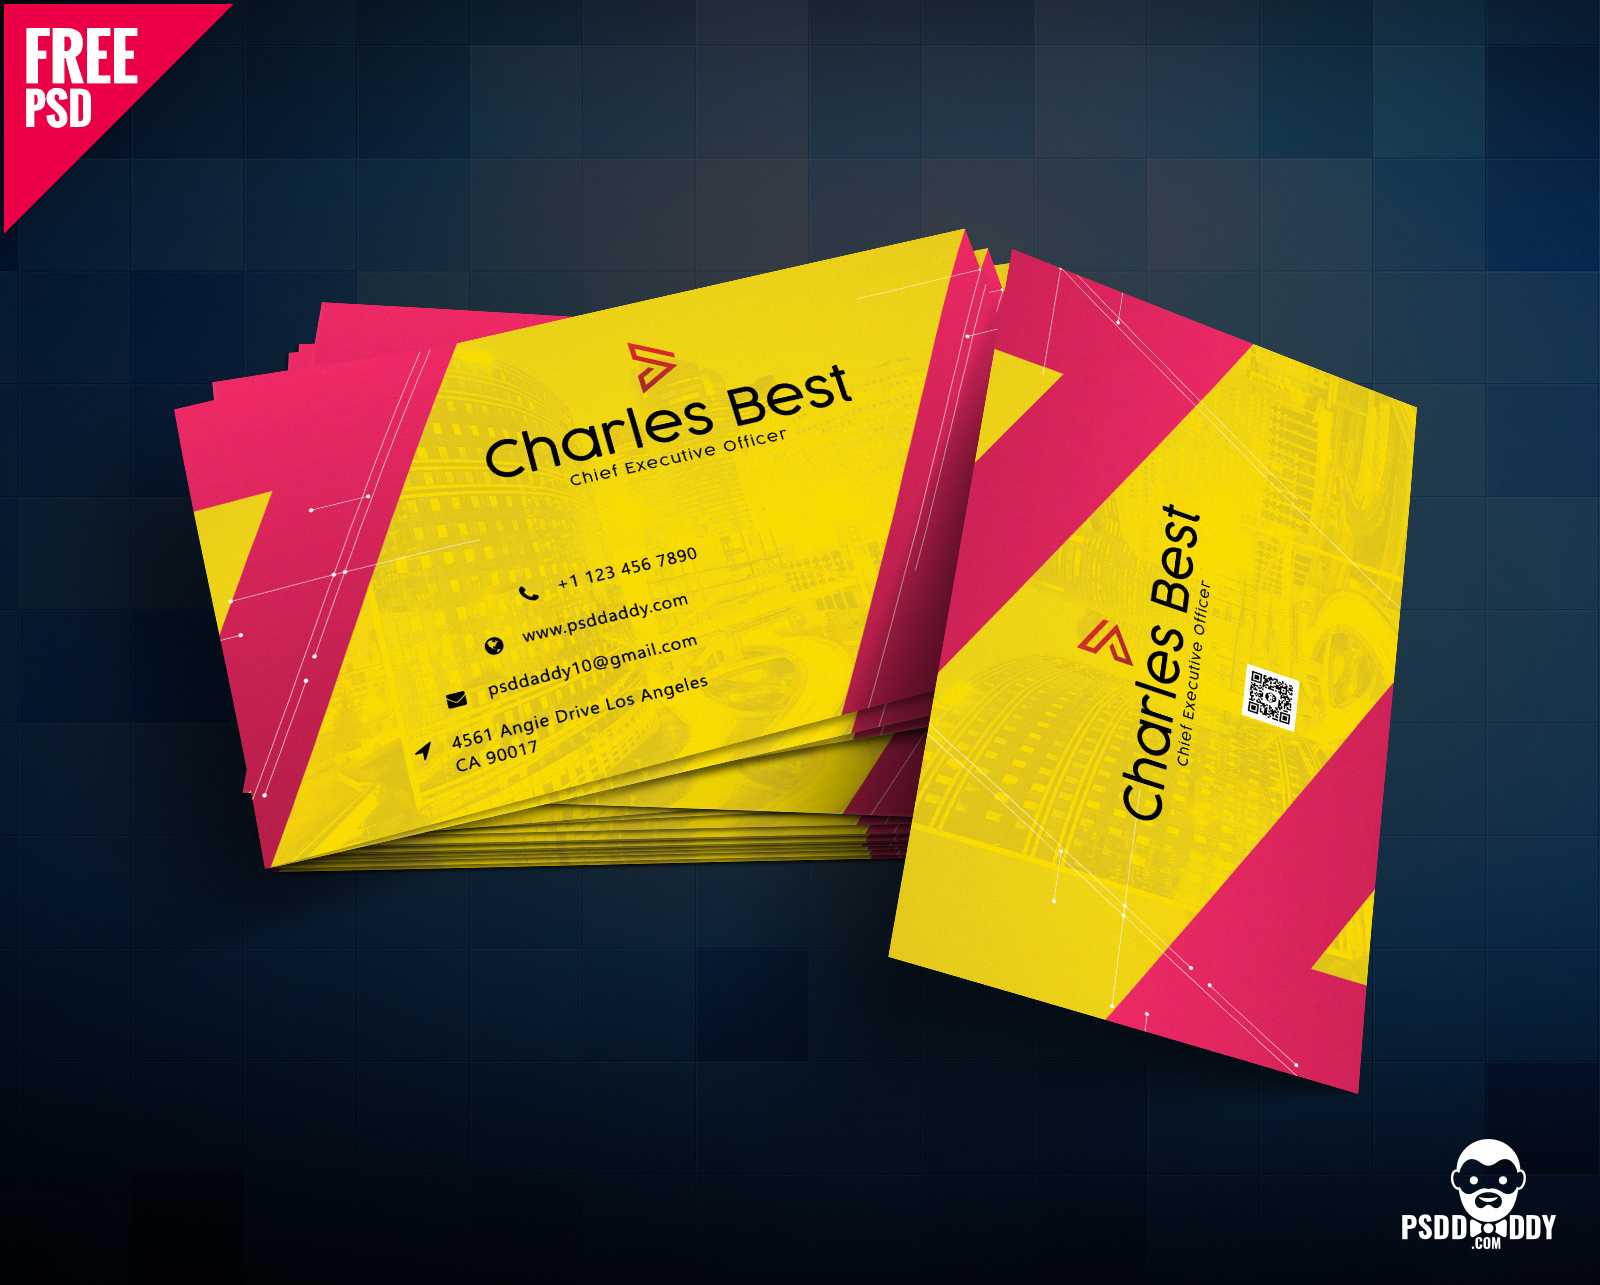 Download] Creative Business Card Free Psd | Psddaddy With Photoshop Name Card Template